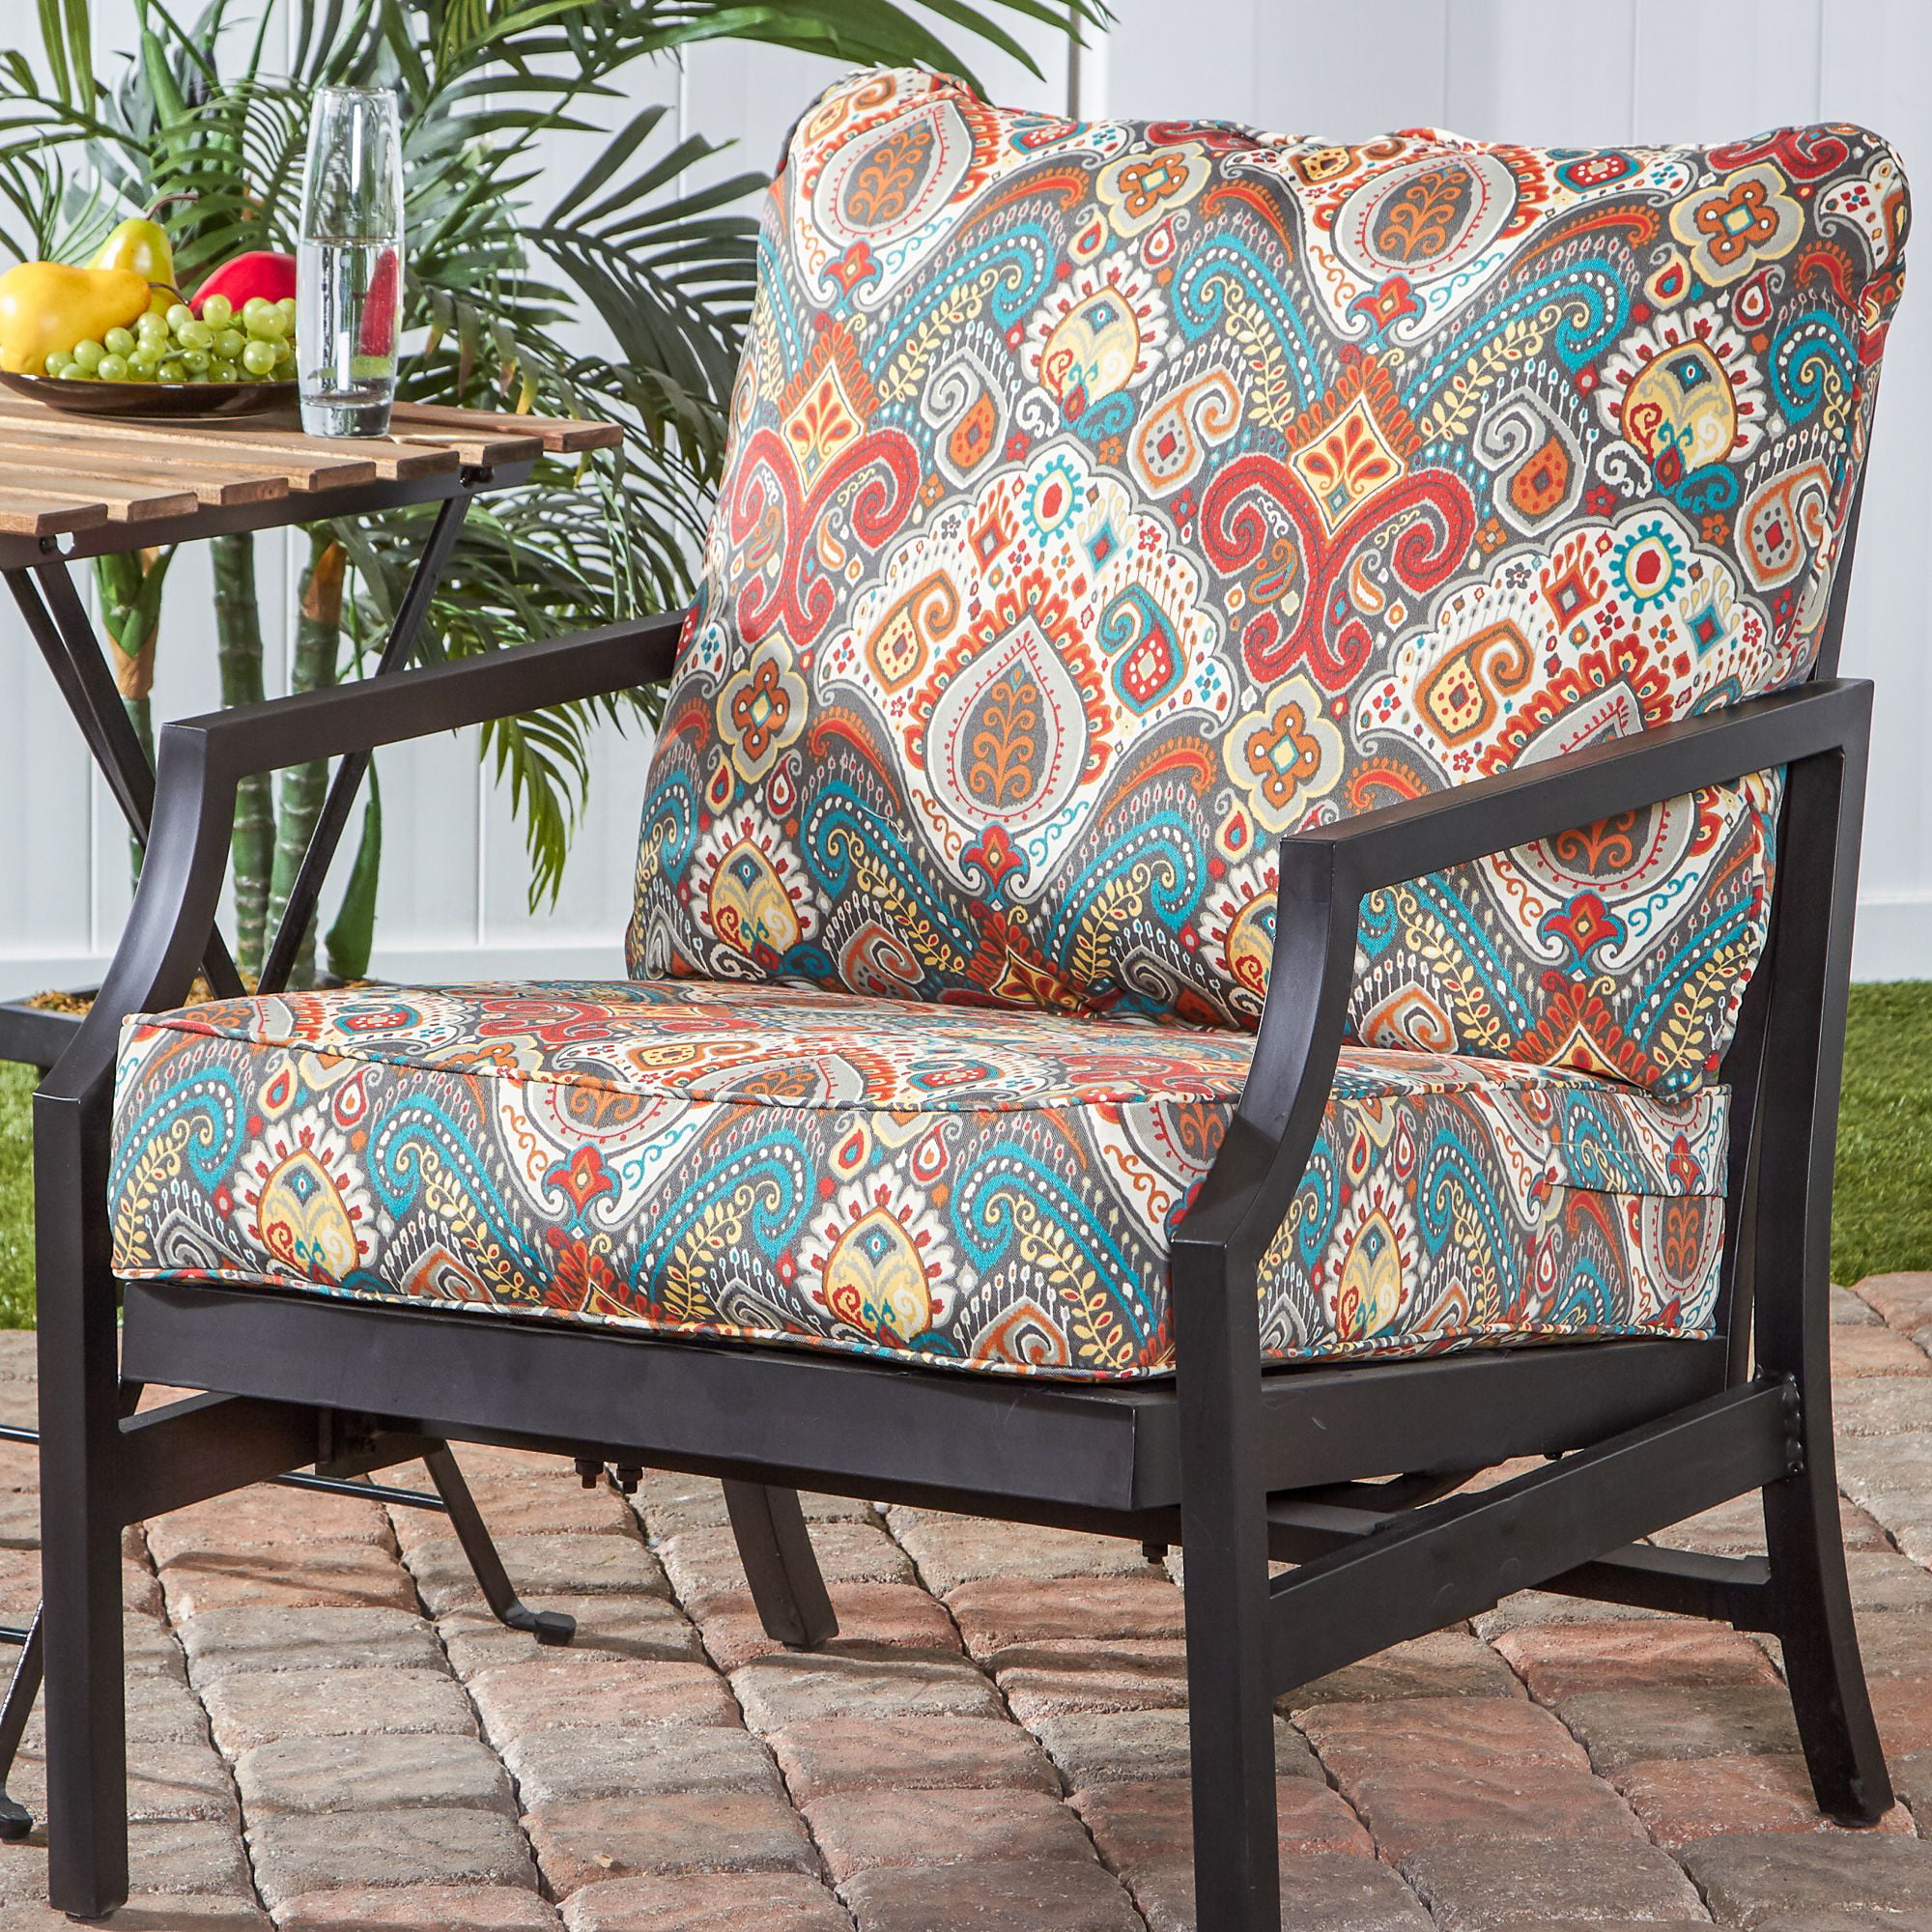 Greendale Home Fashions Asbury Park Outdoor Deep Seat